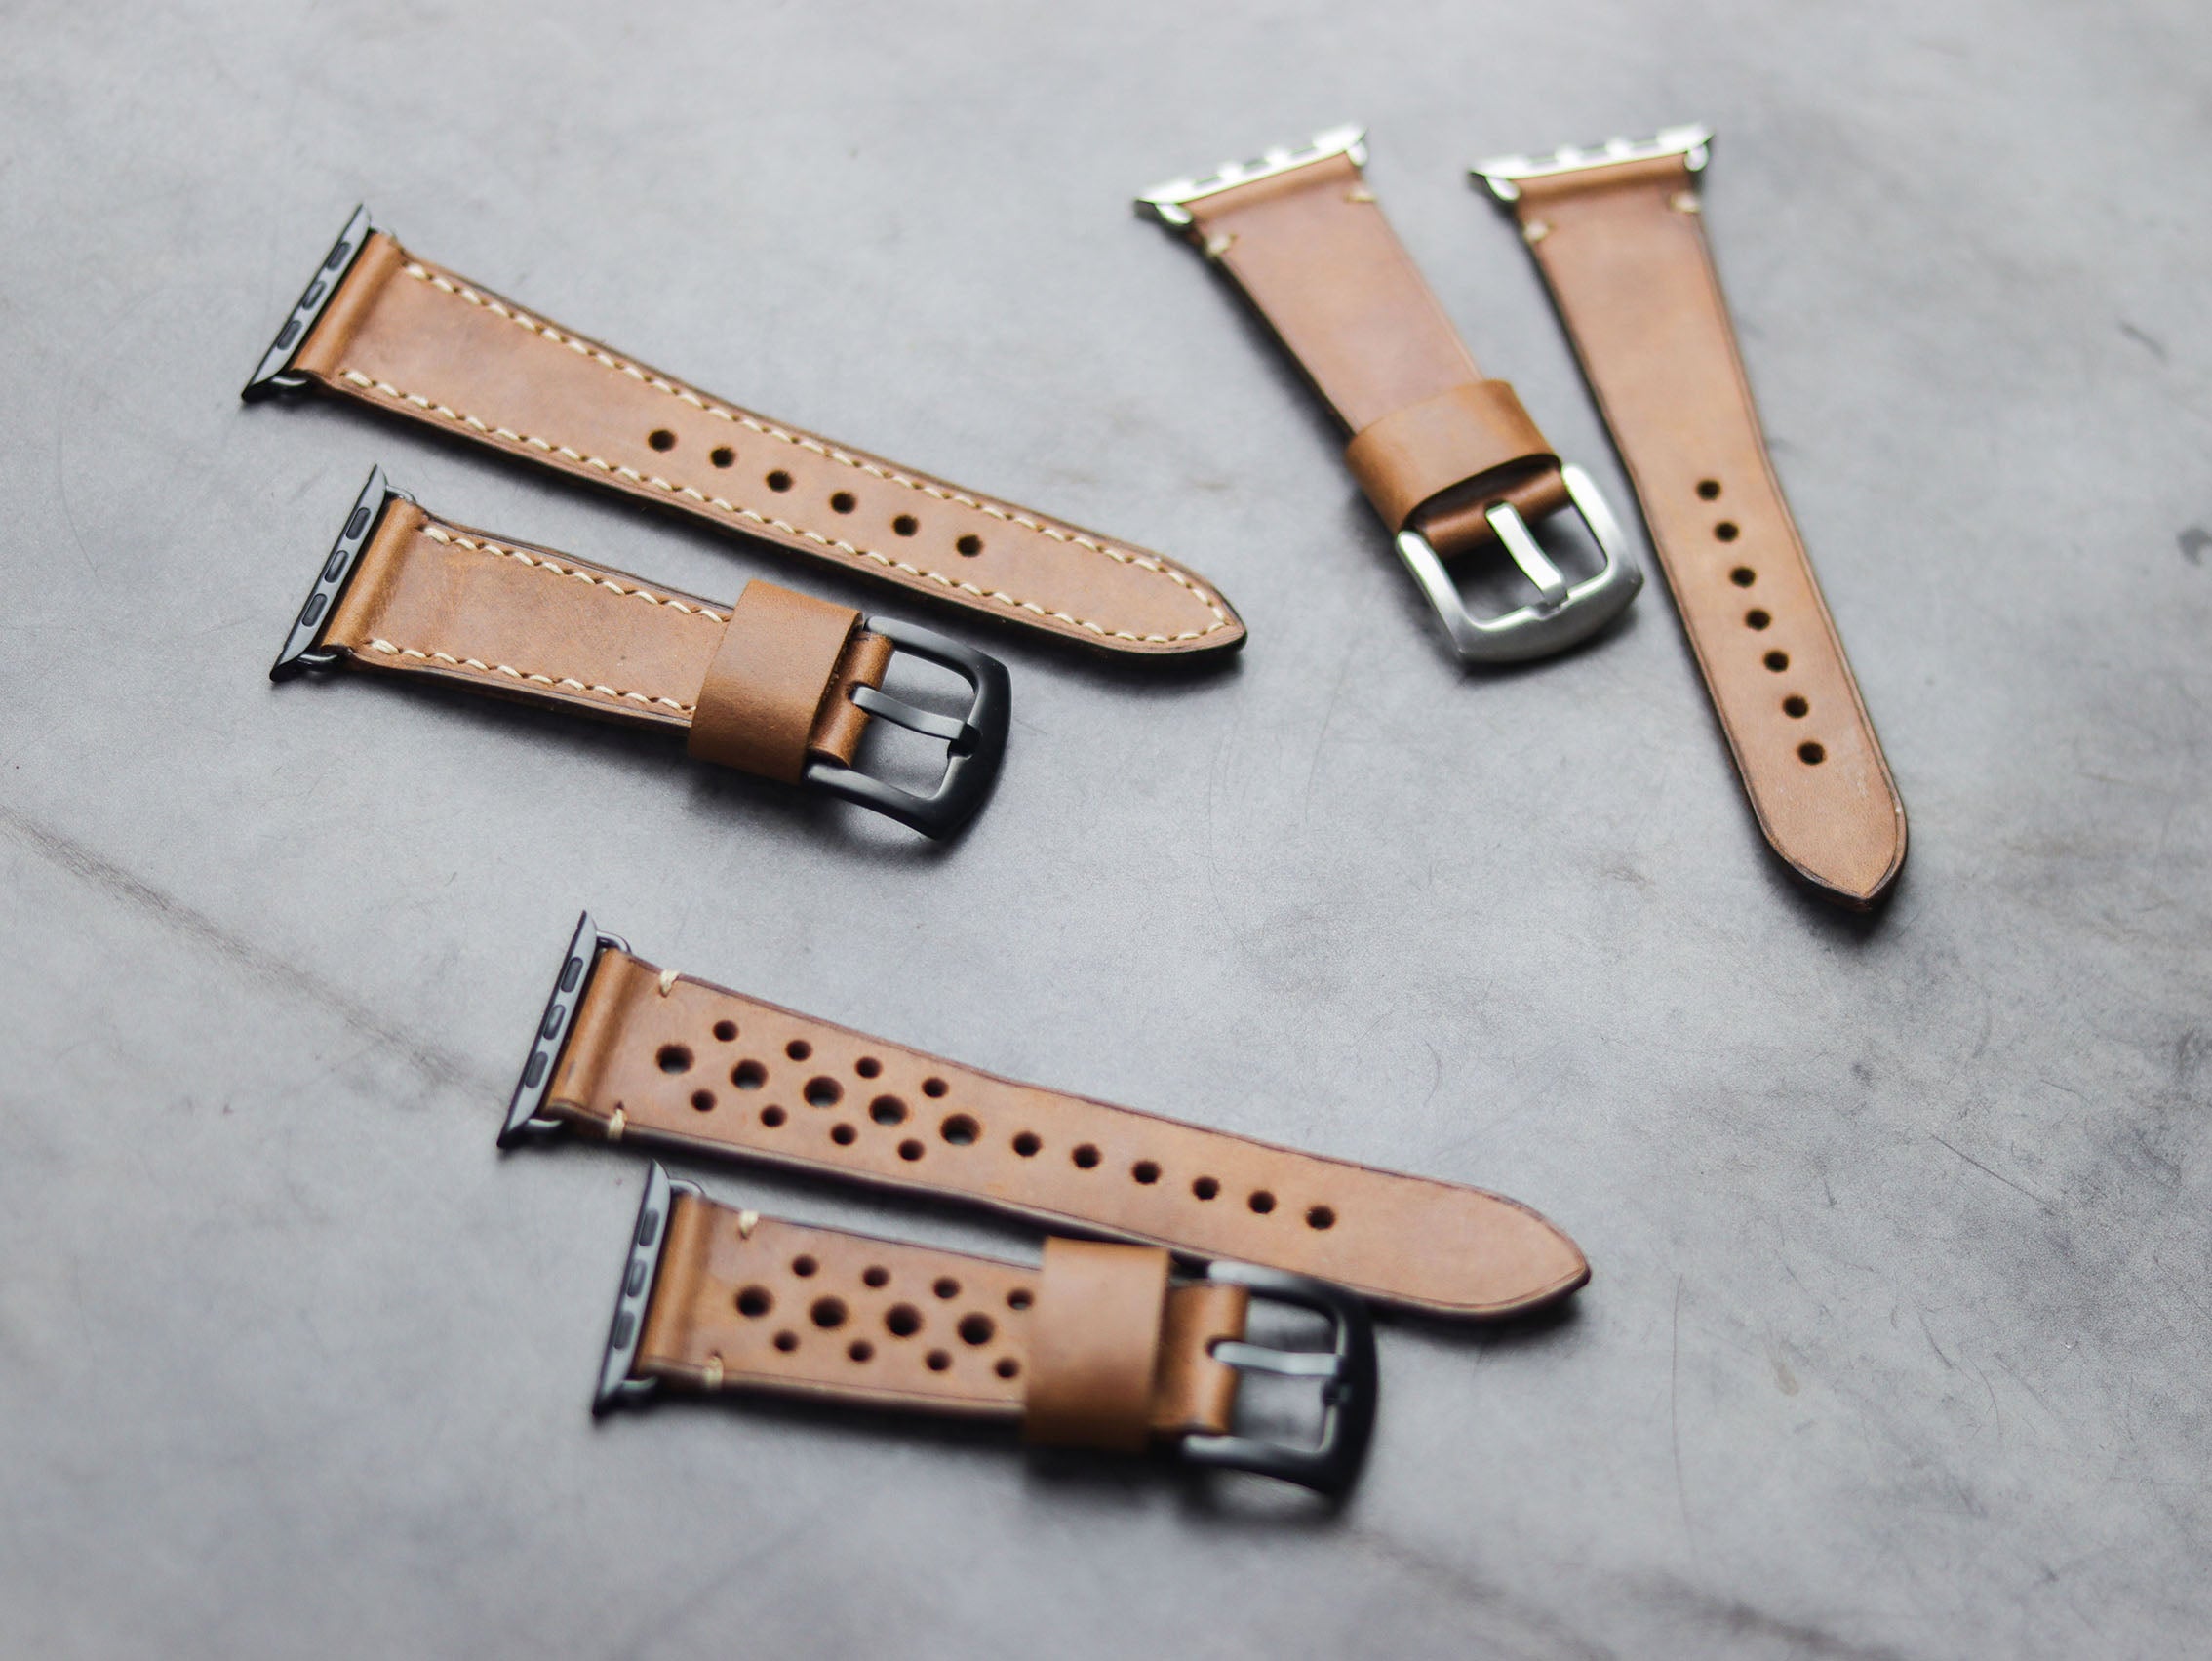 CARAMEL BROWN FULL STITCHED HAND-CRAFTED APPLE WATCH STRAPS